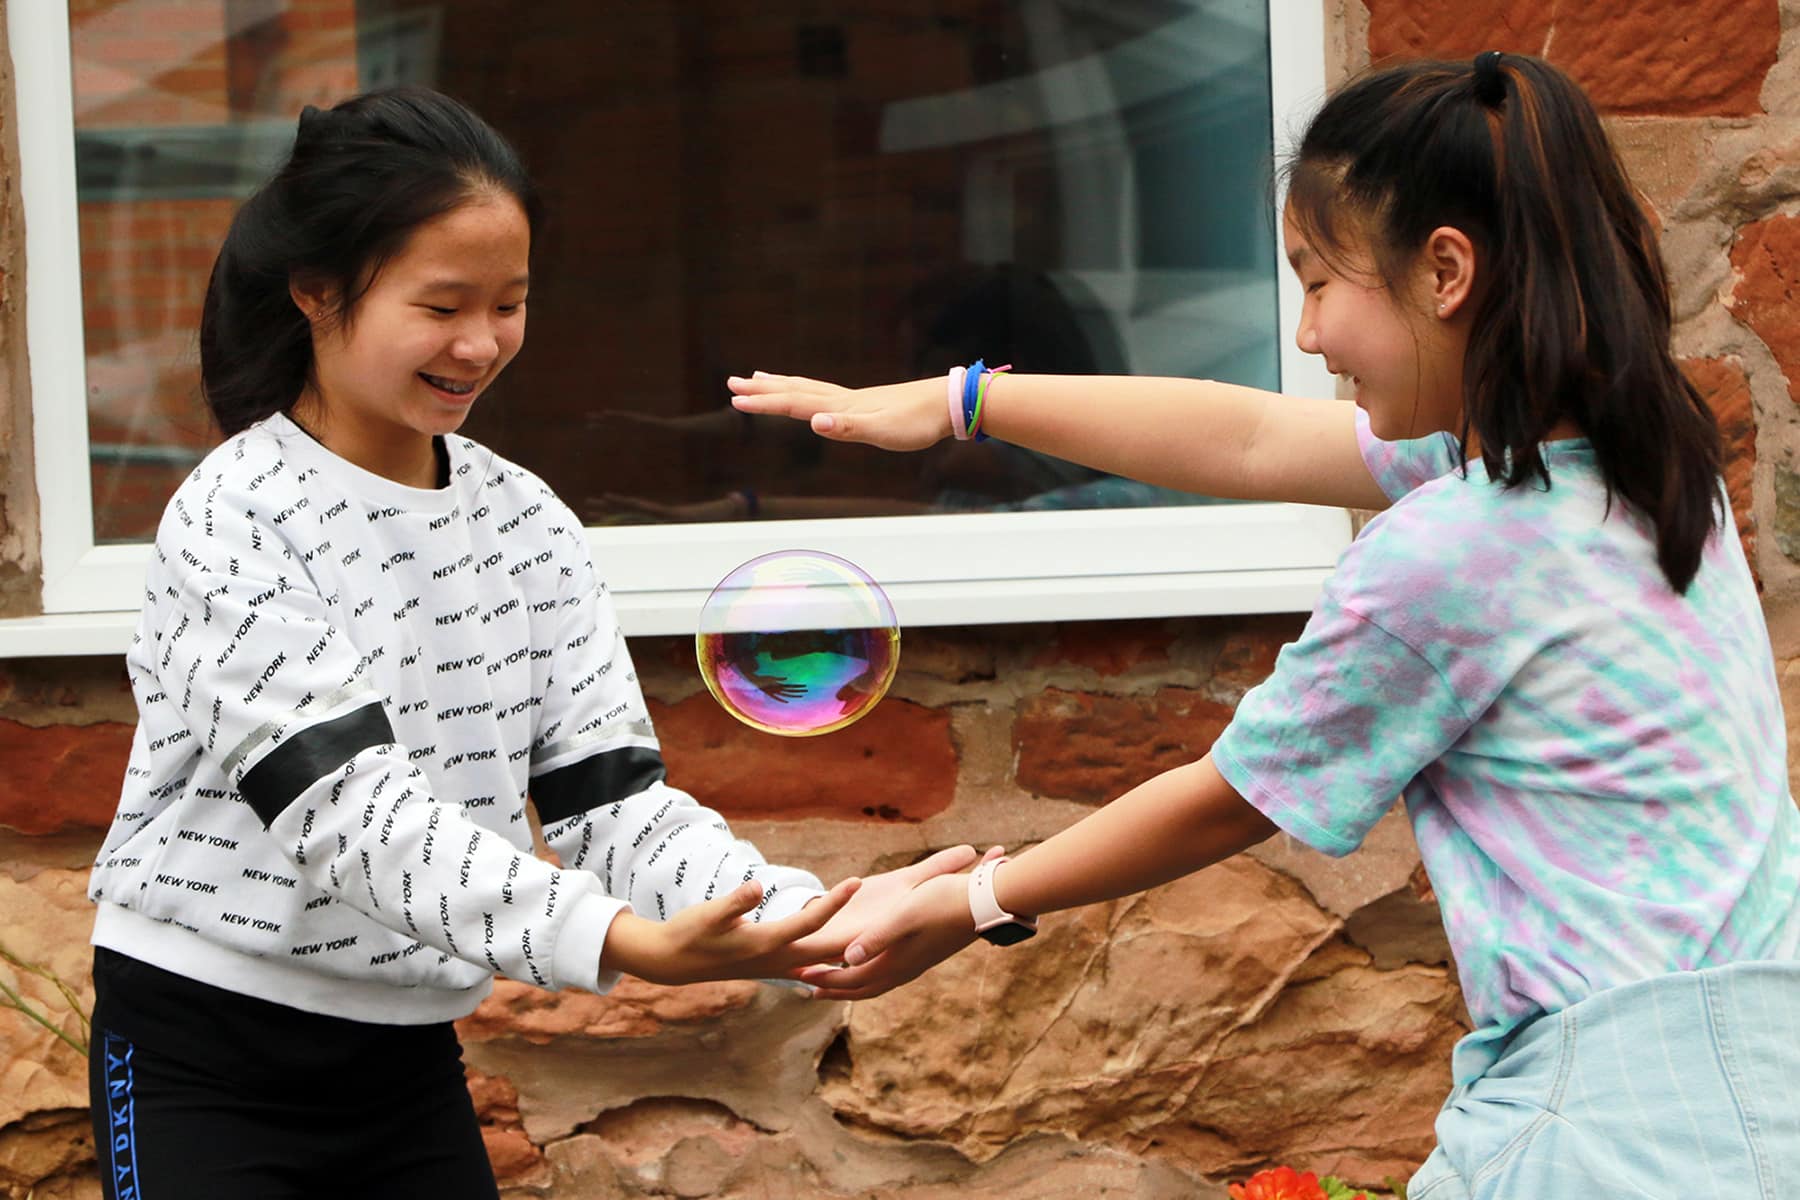 Two girls experimenting with making bubbles.